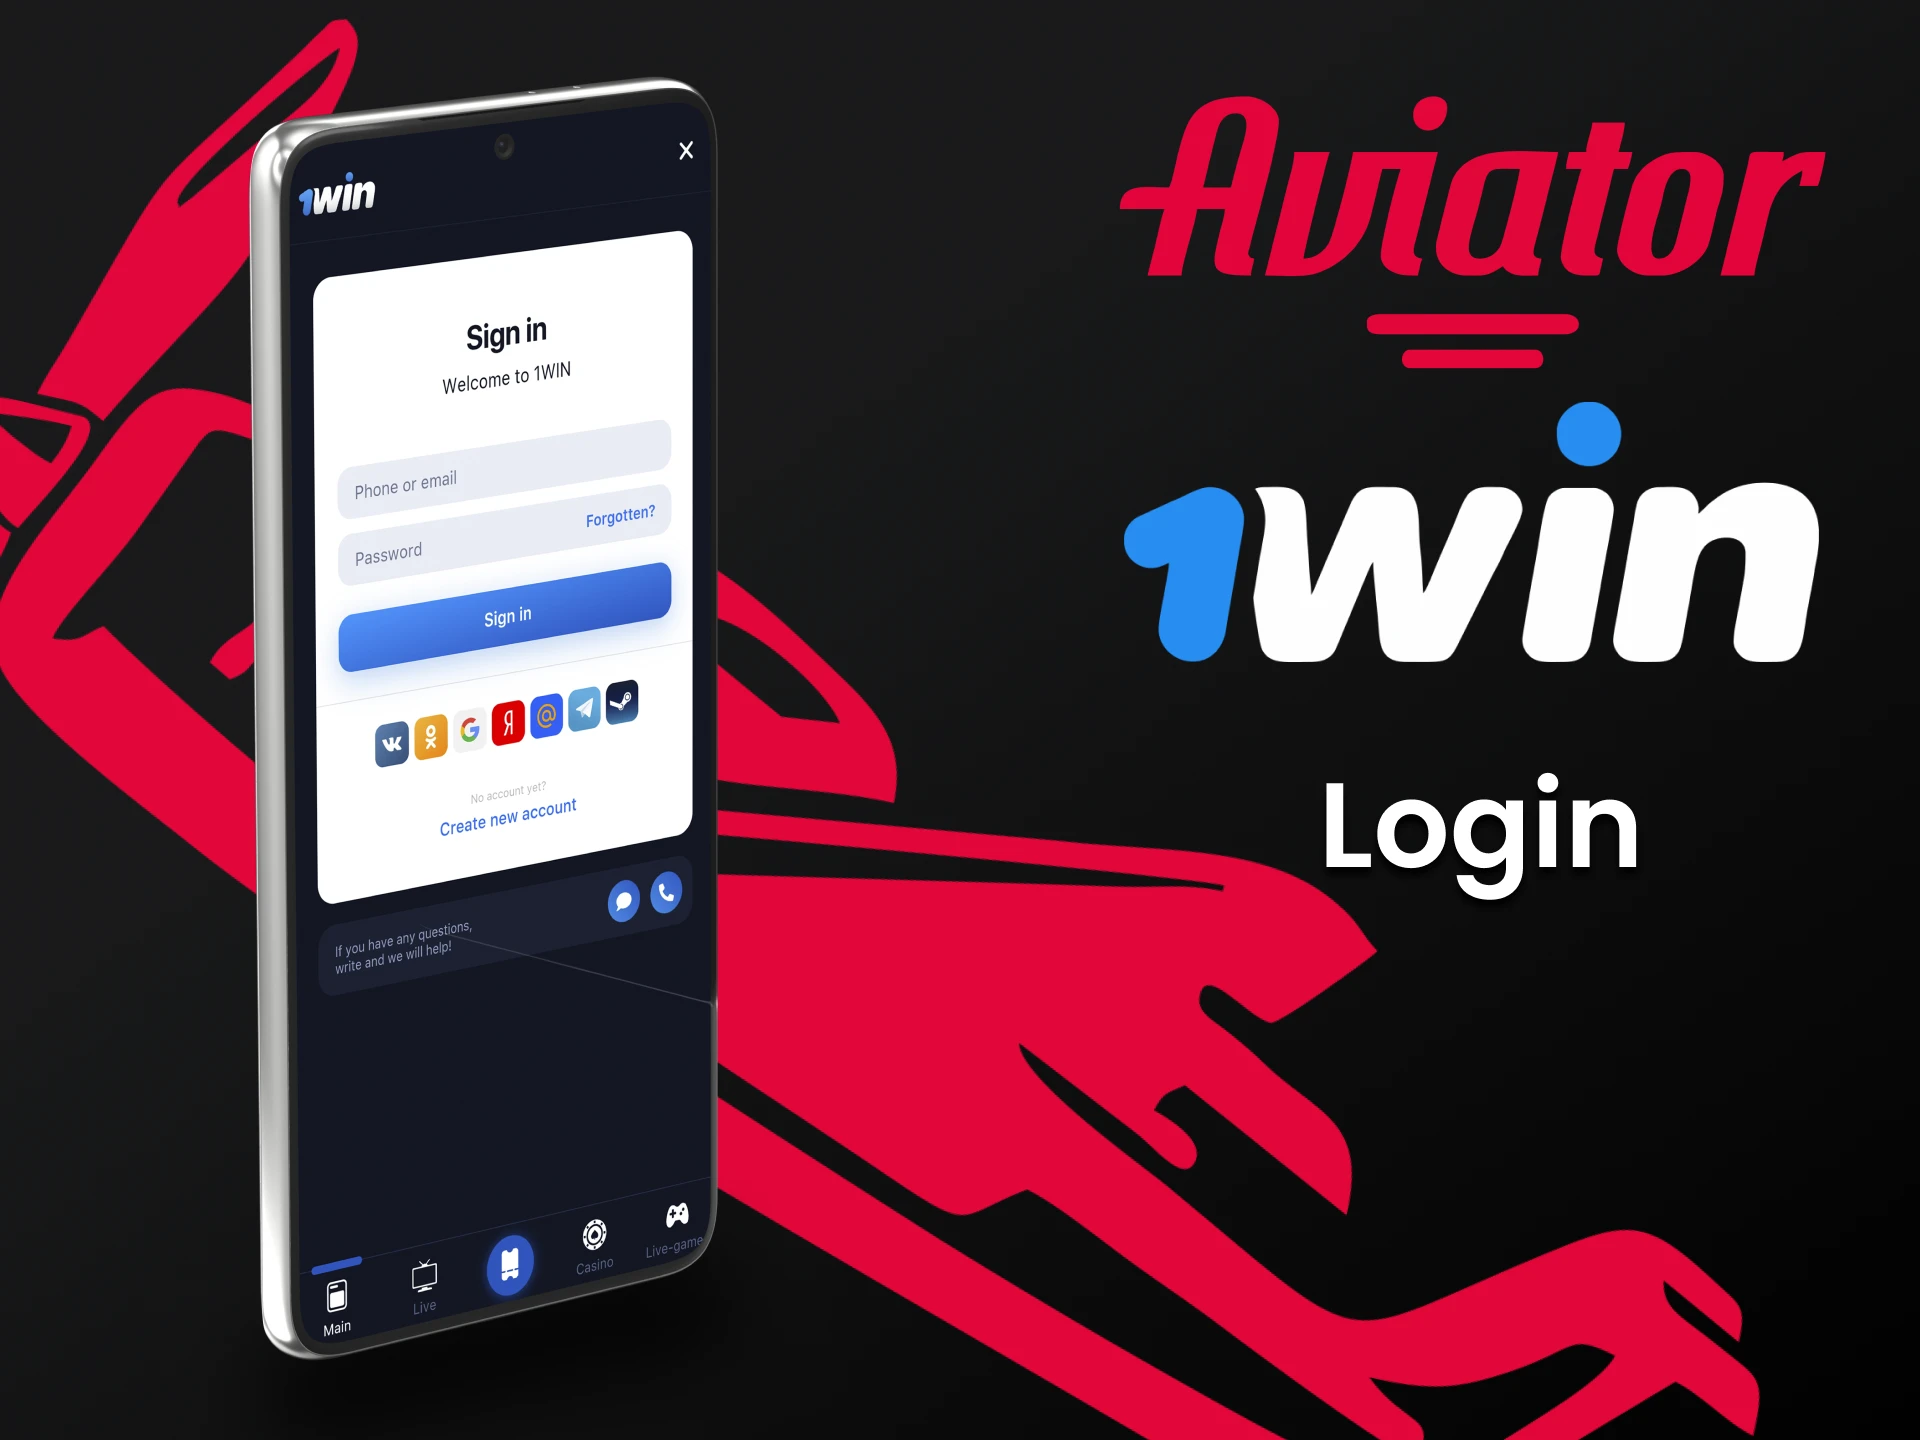 To start playing Aviator on 1win, log in to your account.